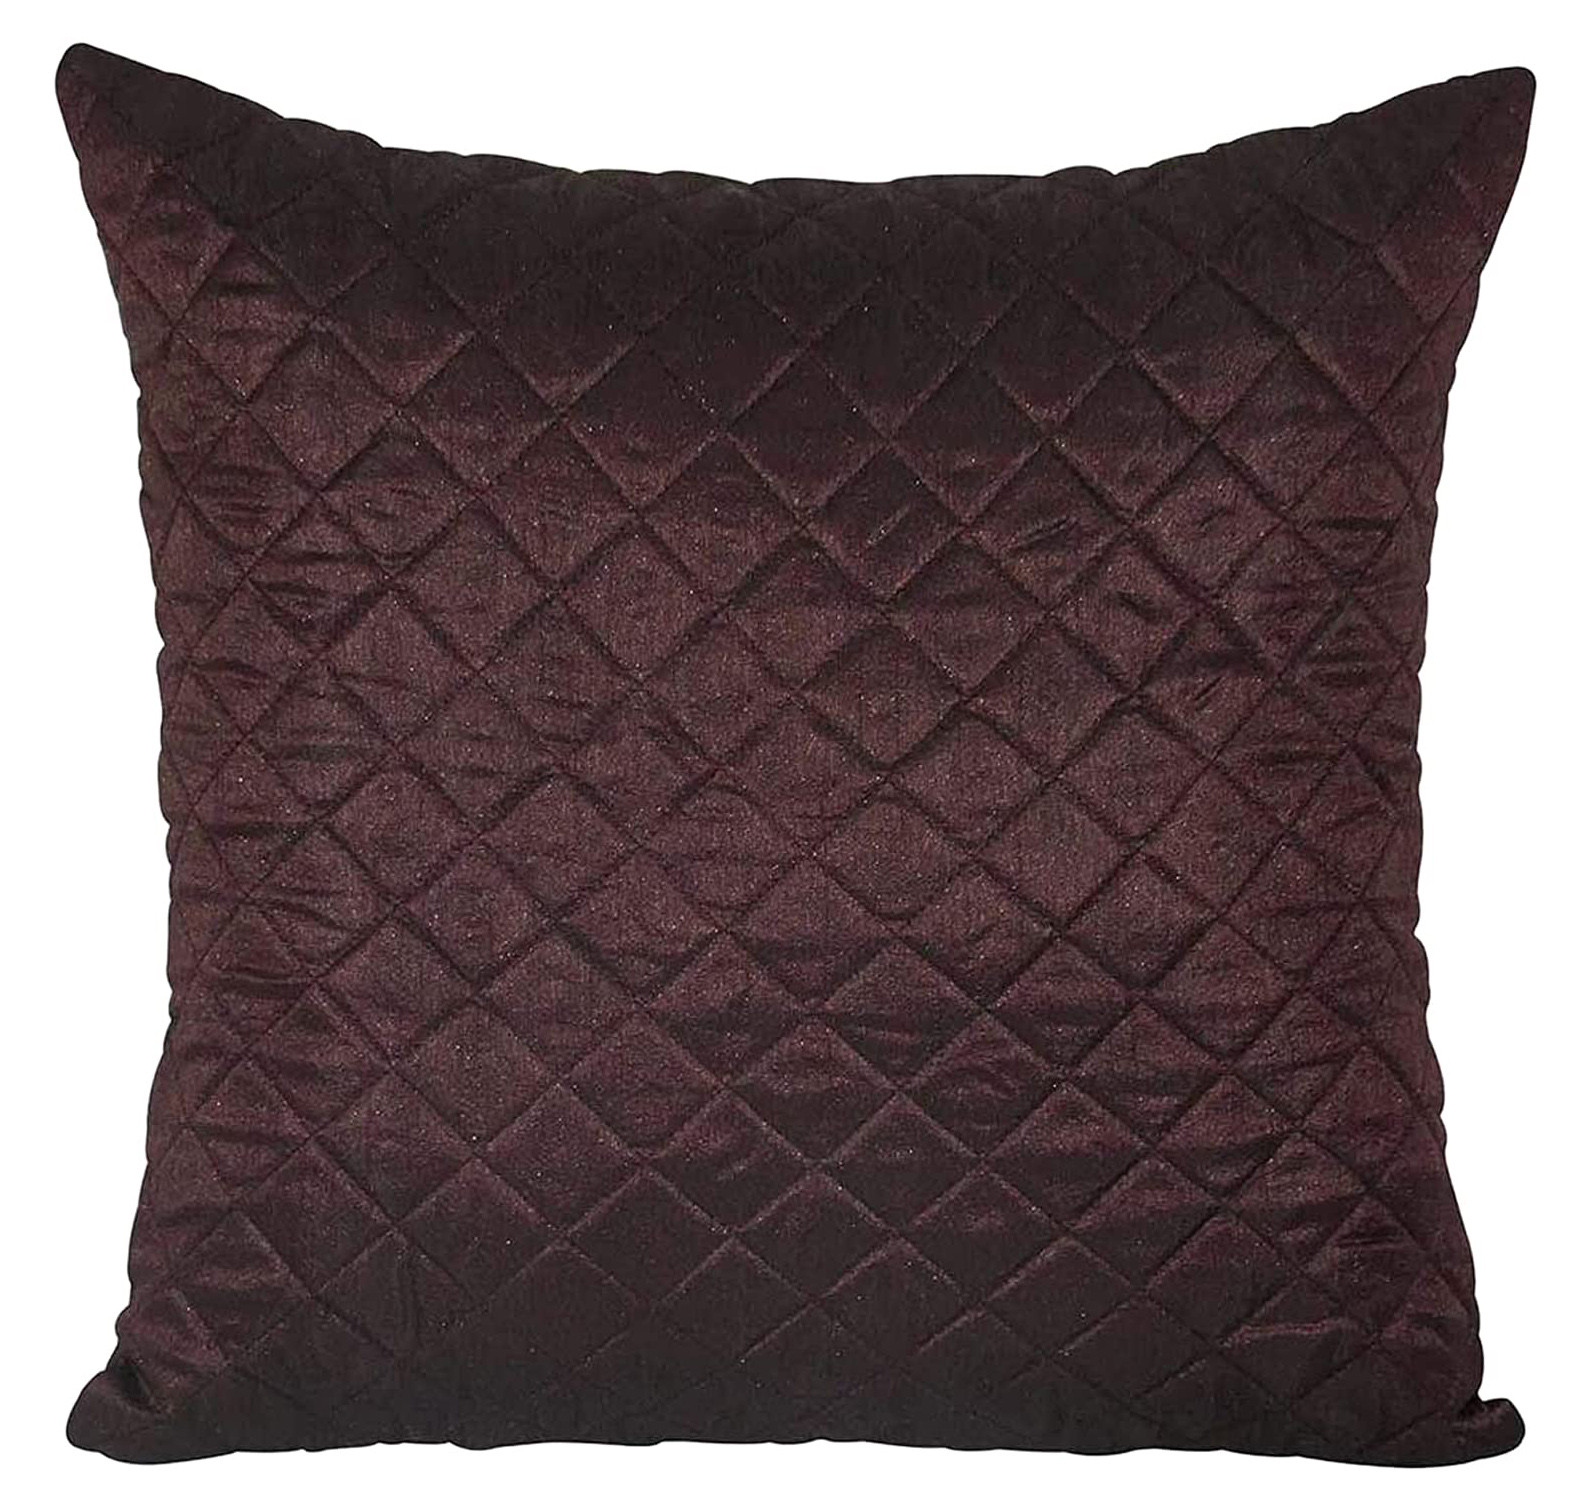 Kuber Industries Soft Decorative Square Quilting Cushion Cover, Cushion Case For Sofa Couch Bed 18x16 Inch-(Brown)